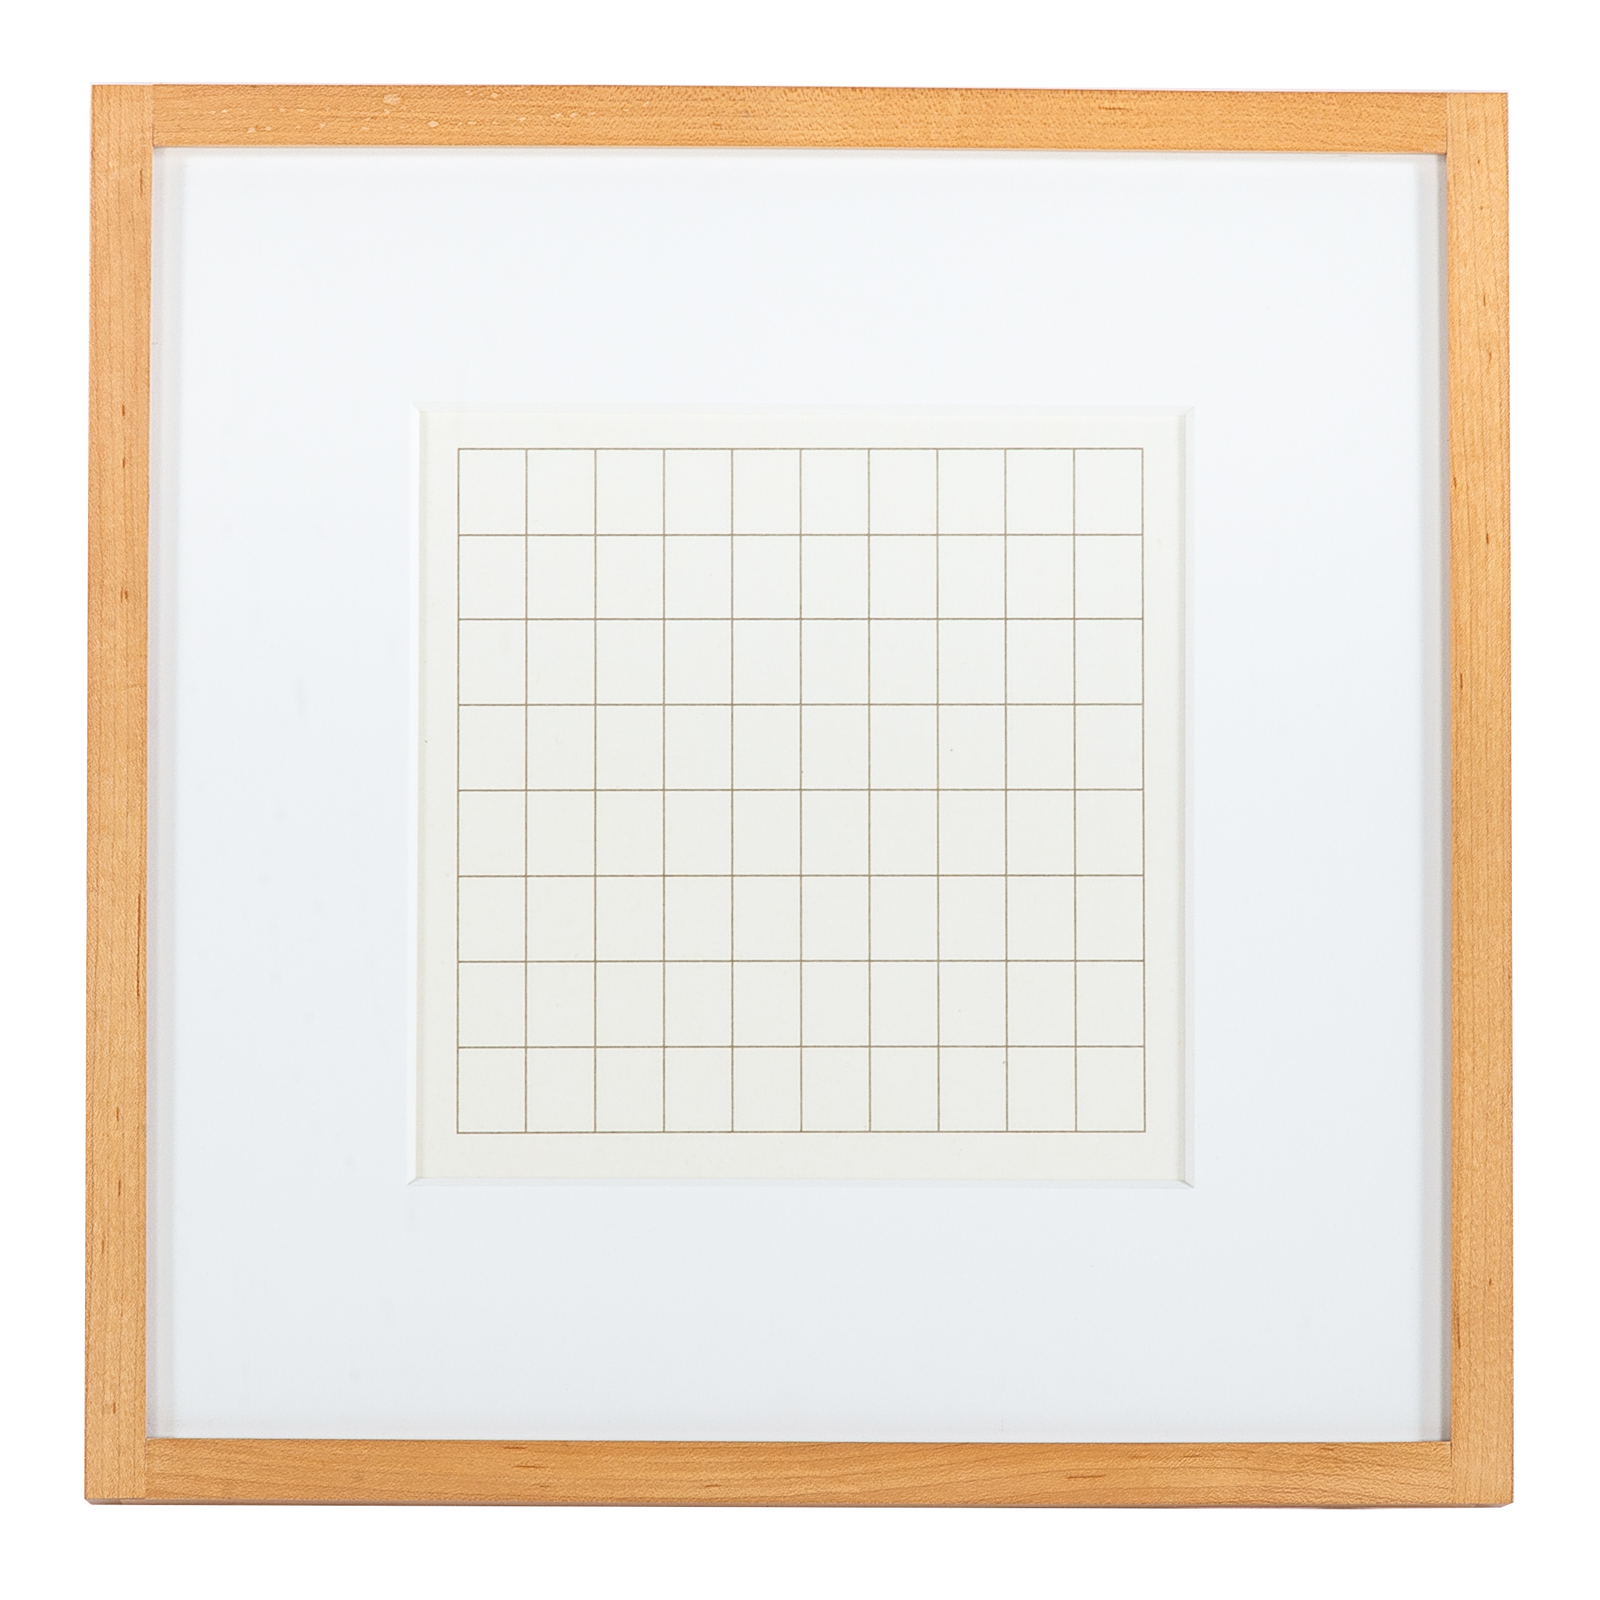 AGNES MARTIN. "ON A CLEAR DAY,"